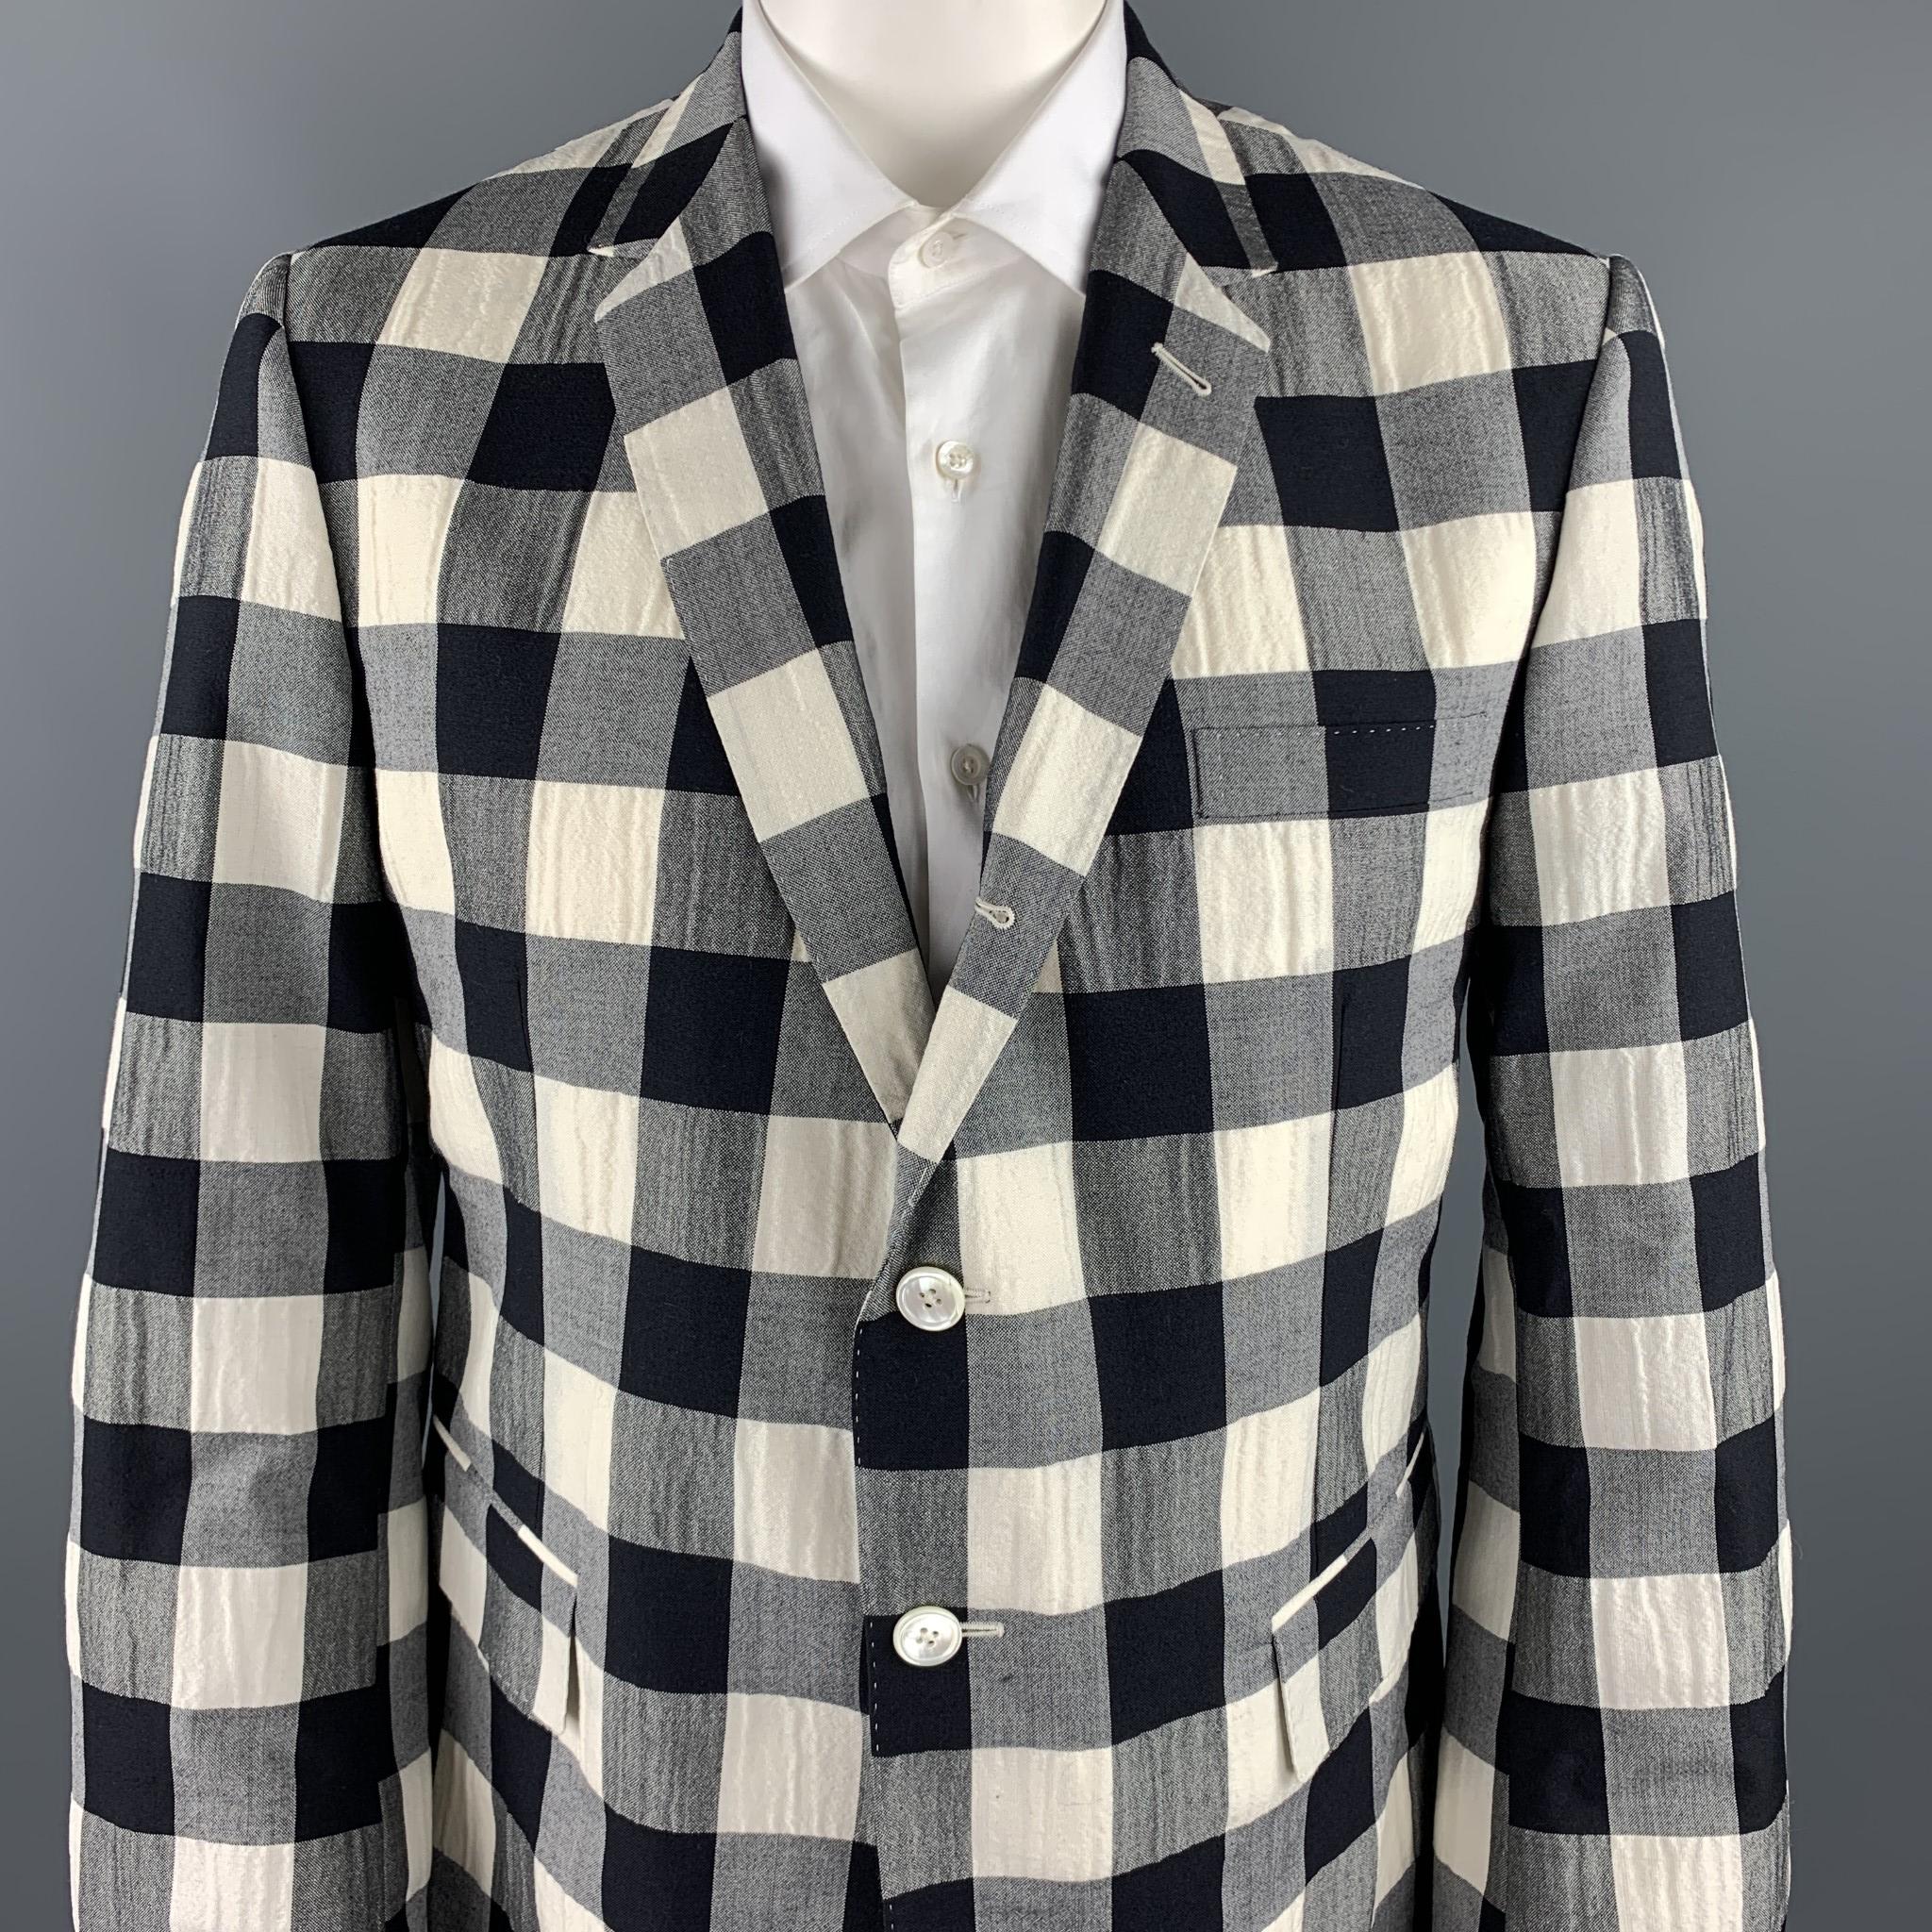 THOM BROWNE sport coat comes in a black & beige checkered wool blend with a full striped liner featuring a notch lapel, flap pockets, and a three button closure. Made in Italy.

Excellent Pre-Owned Condition.
Marked: 50 R 

Measurements:

Shoulder: